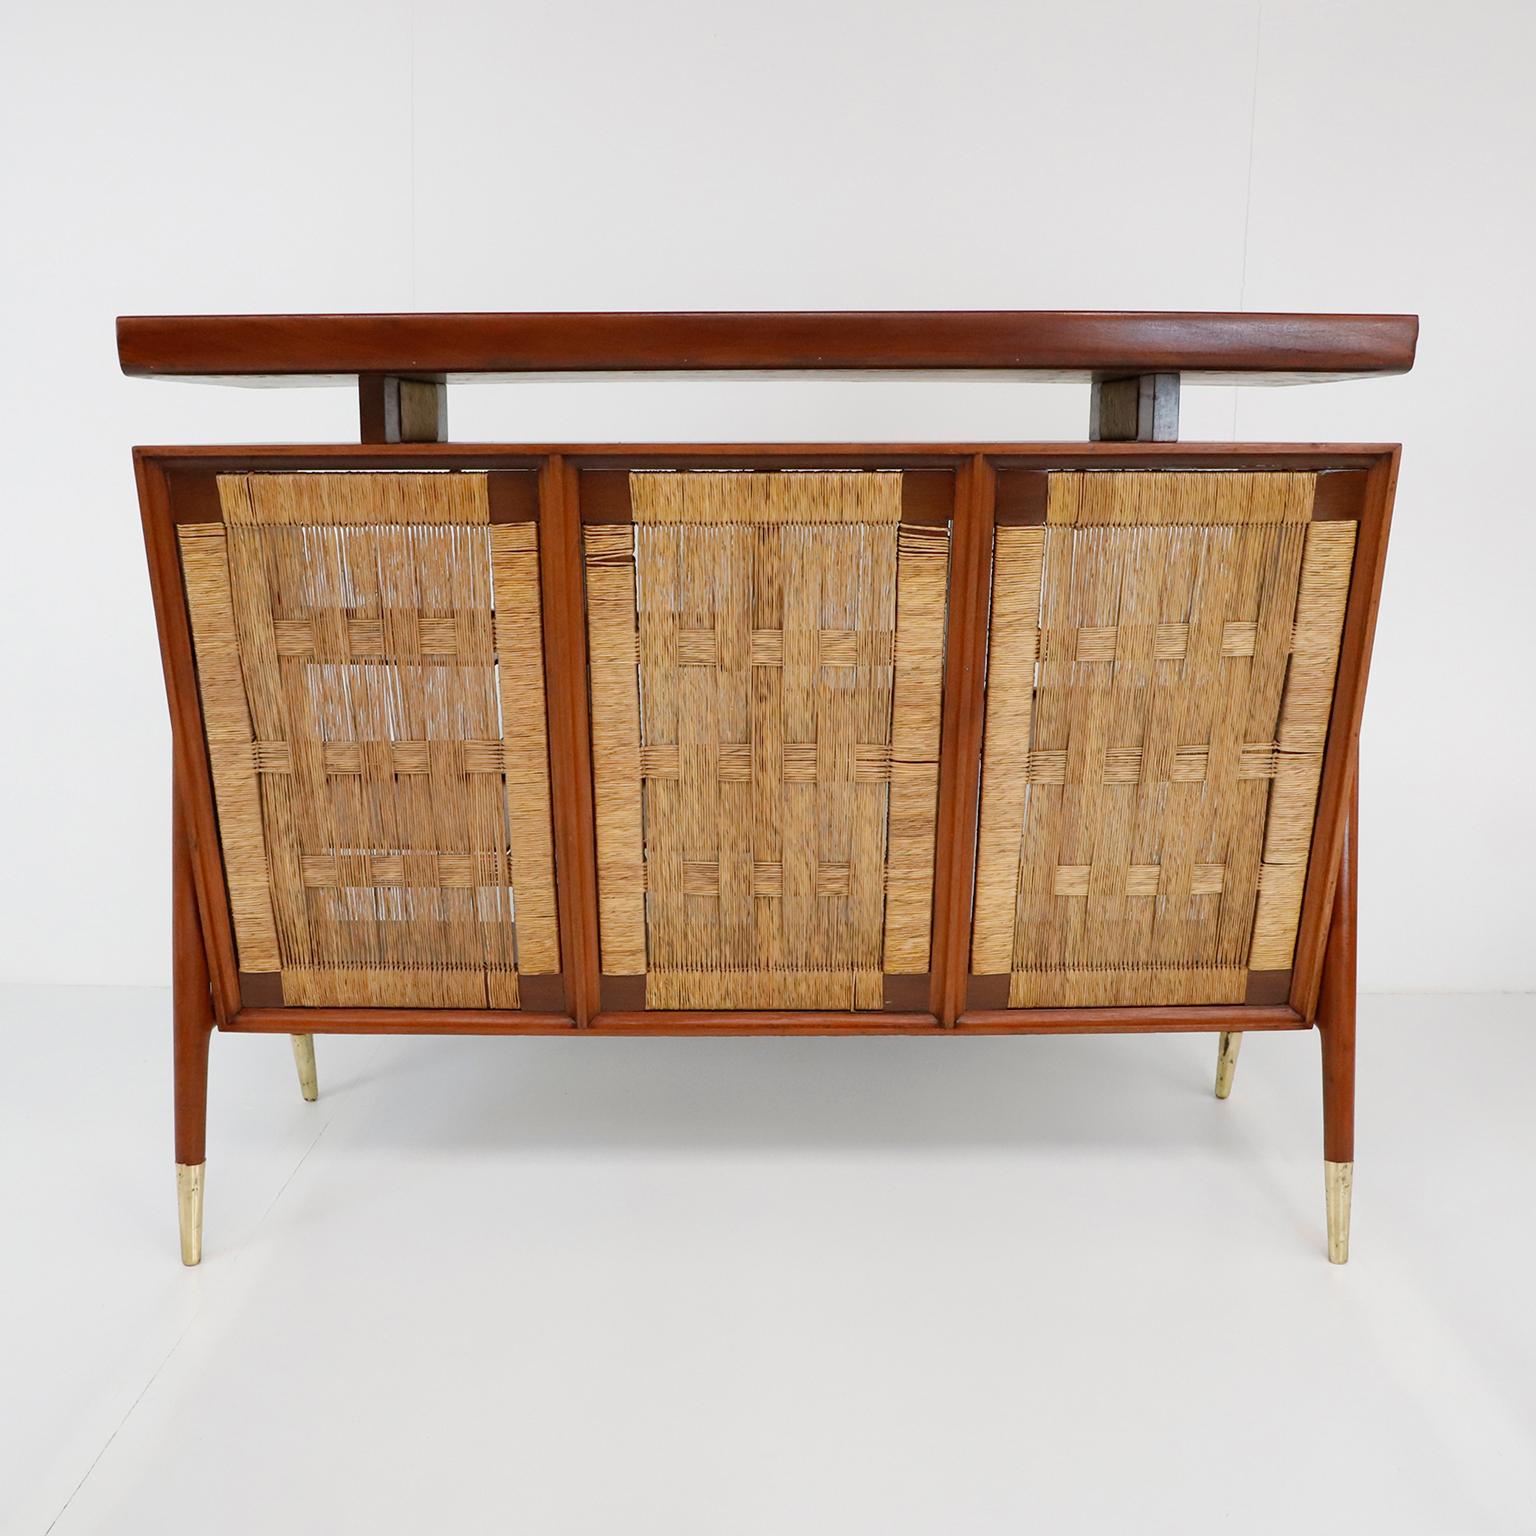 Circa 1960, we offer this beautiful and rare mid century Mexican woven bar and stools set. Attributed to Edmund Spence. Made first class mahogany wood.